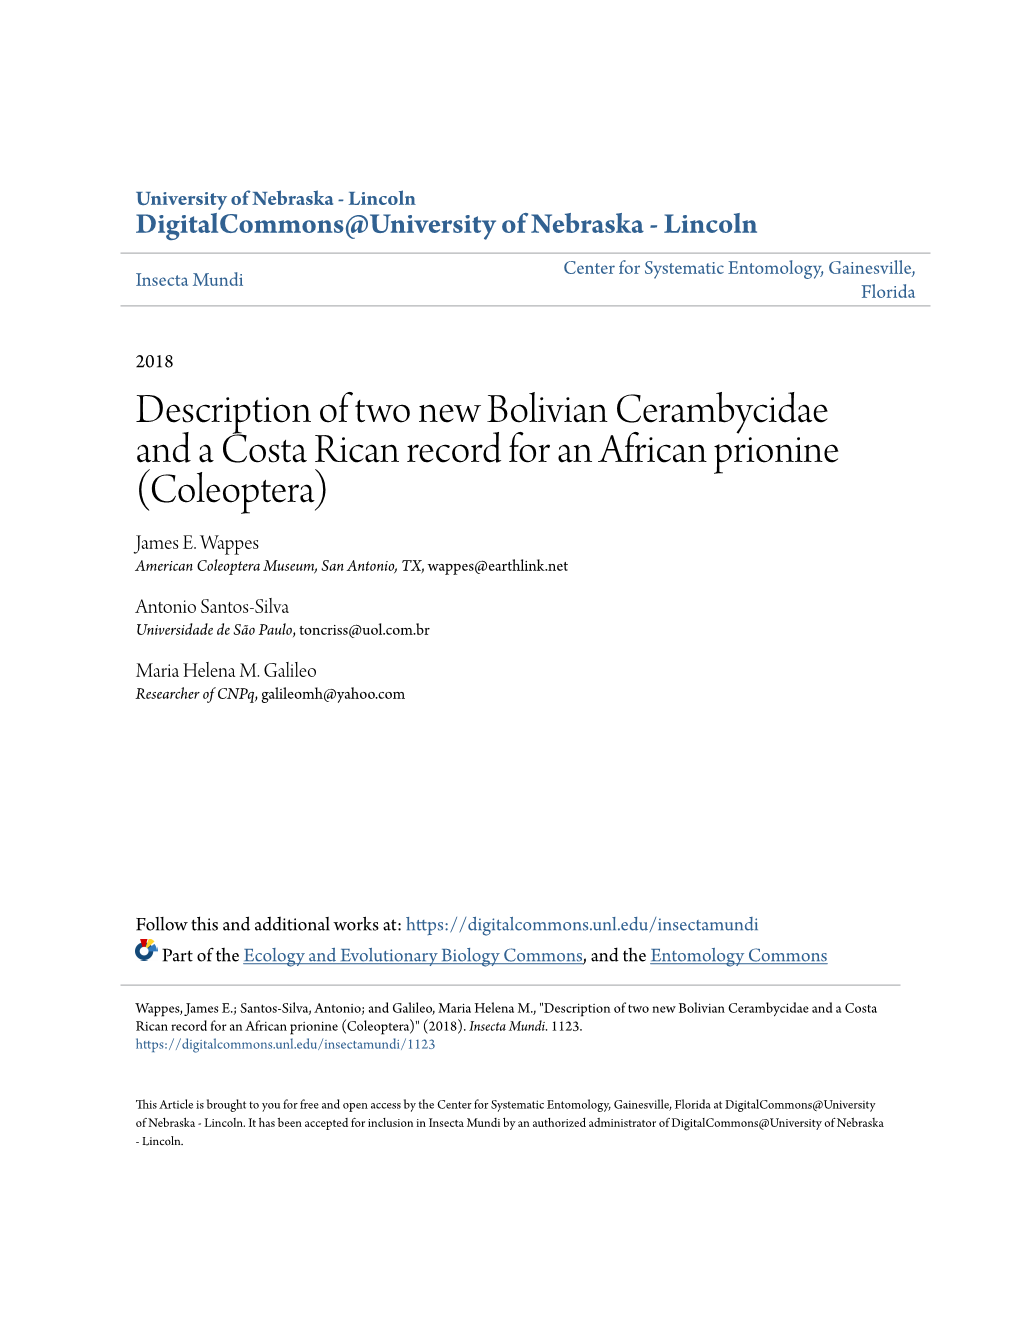 Description of Two New Bolivian Cerambycidae and a Costa Rican Record for an African Prionine (Coleoptera) James E